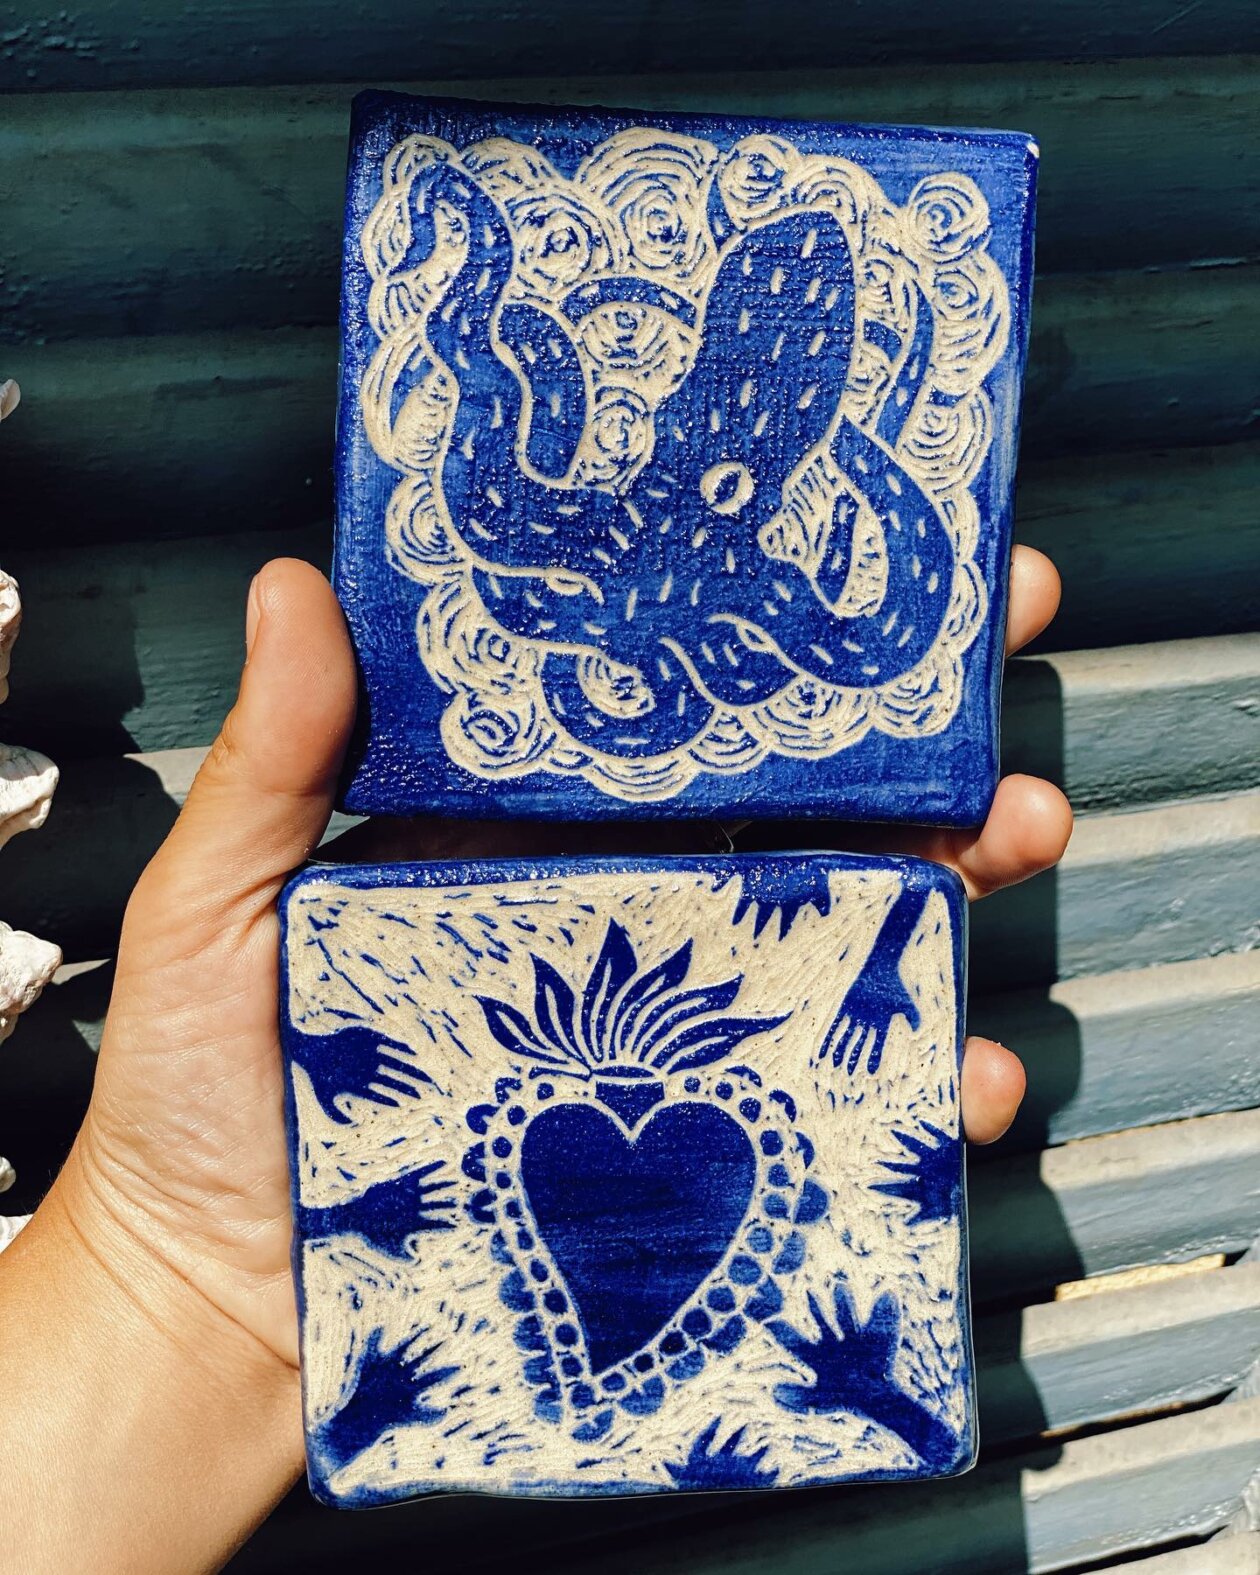 Illustred Ceramic Vessels And Tiles By Clara Holt 2